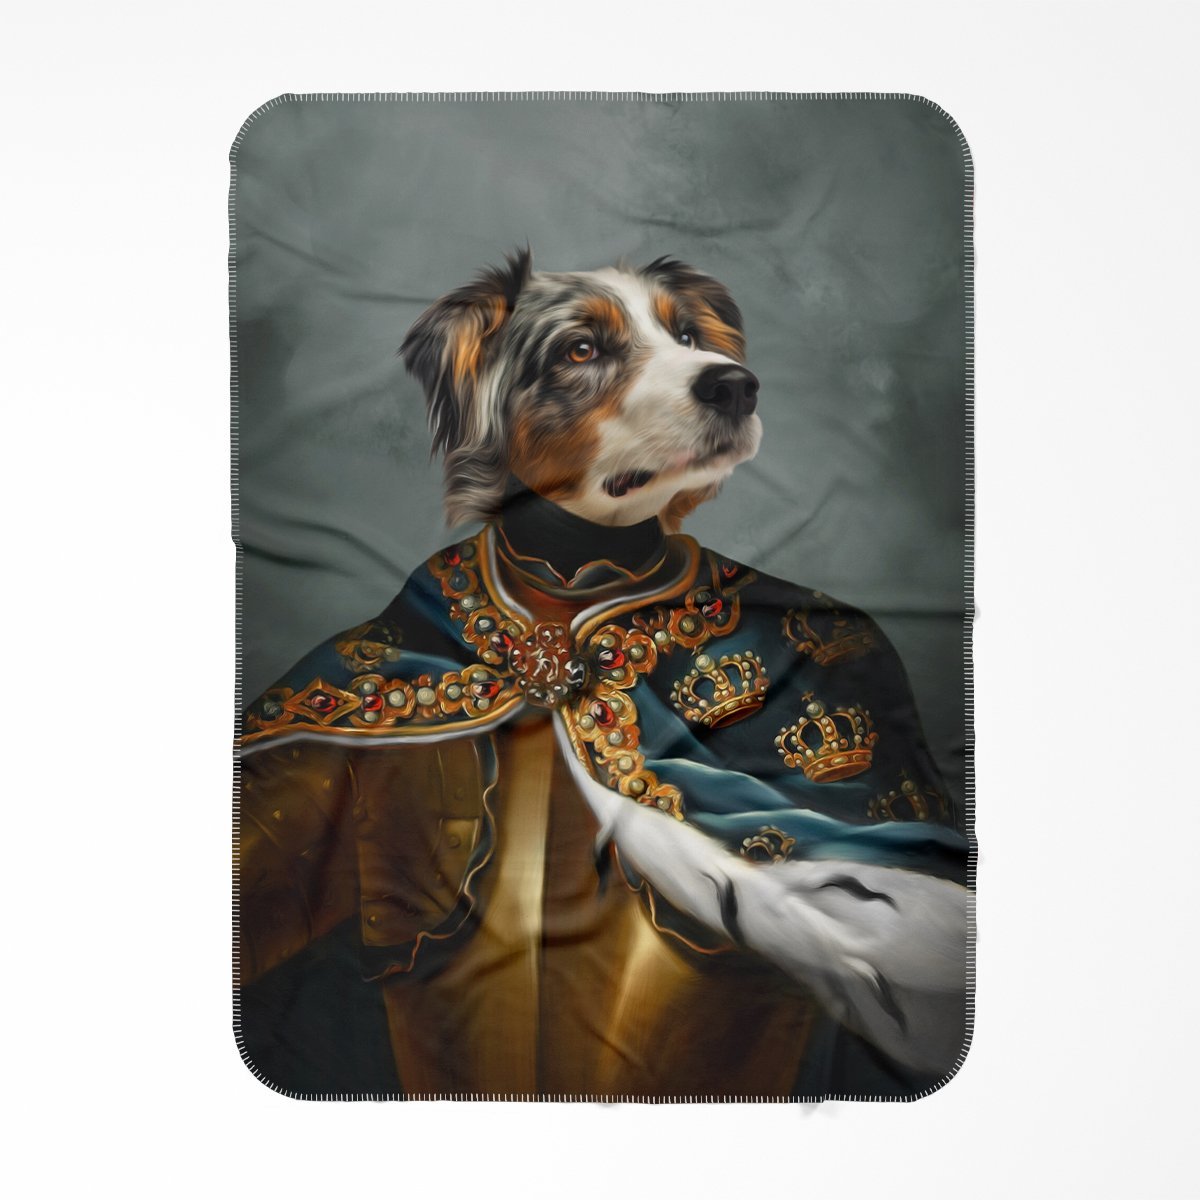 The Royal Knight: Custom Pet Blanket - Paw & Glory - #pet portraits# - #dog portraits# - #pet portraits uk#Pawandglory, Pet art blanket,super soft dog blanket, soft puppy blanket, pet blanket for bed, best dog blanket for couch, personalised dog blanket next day delivery